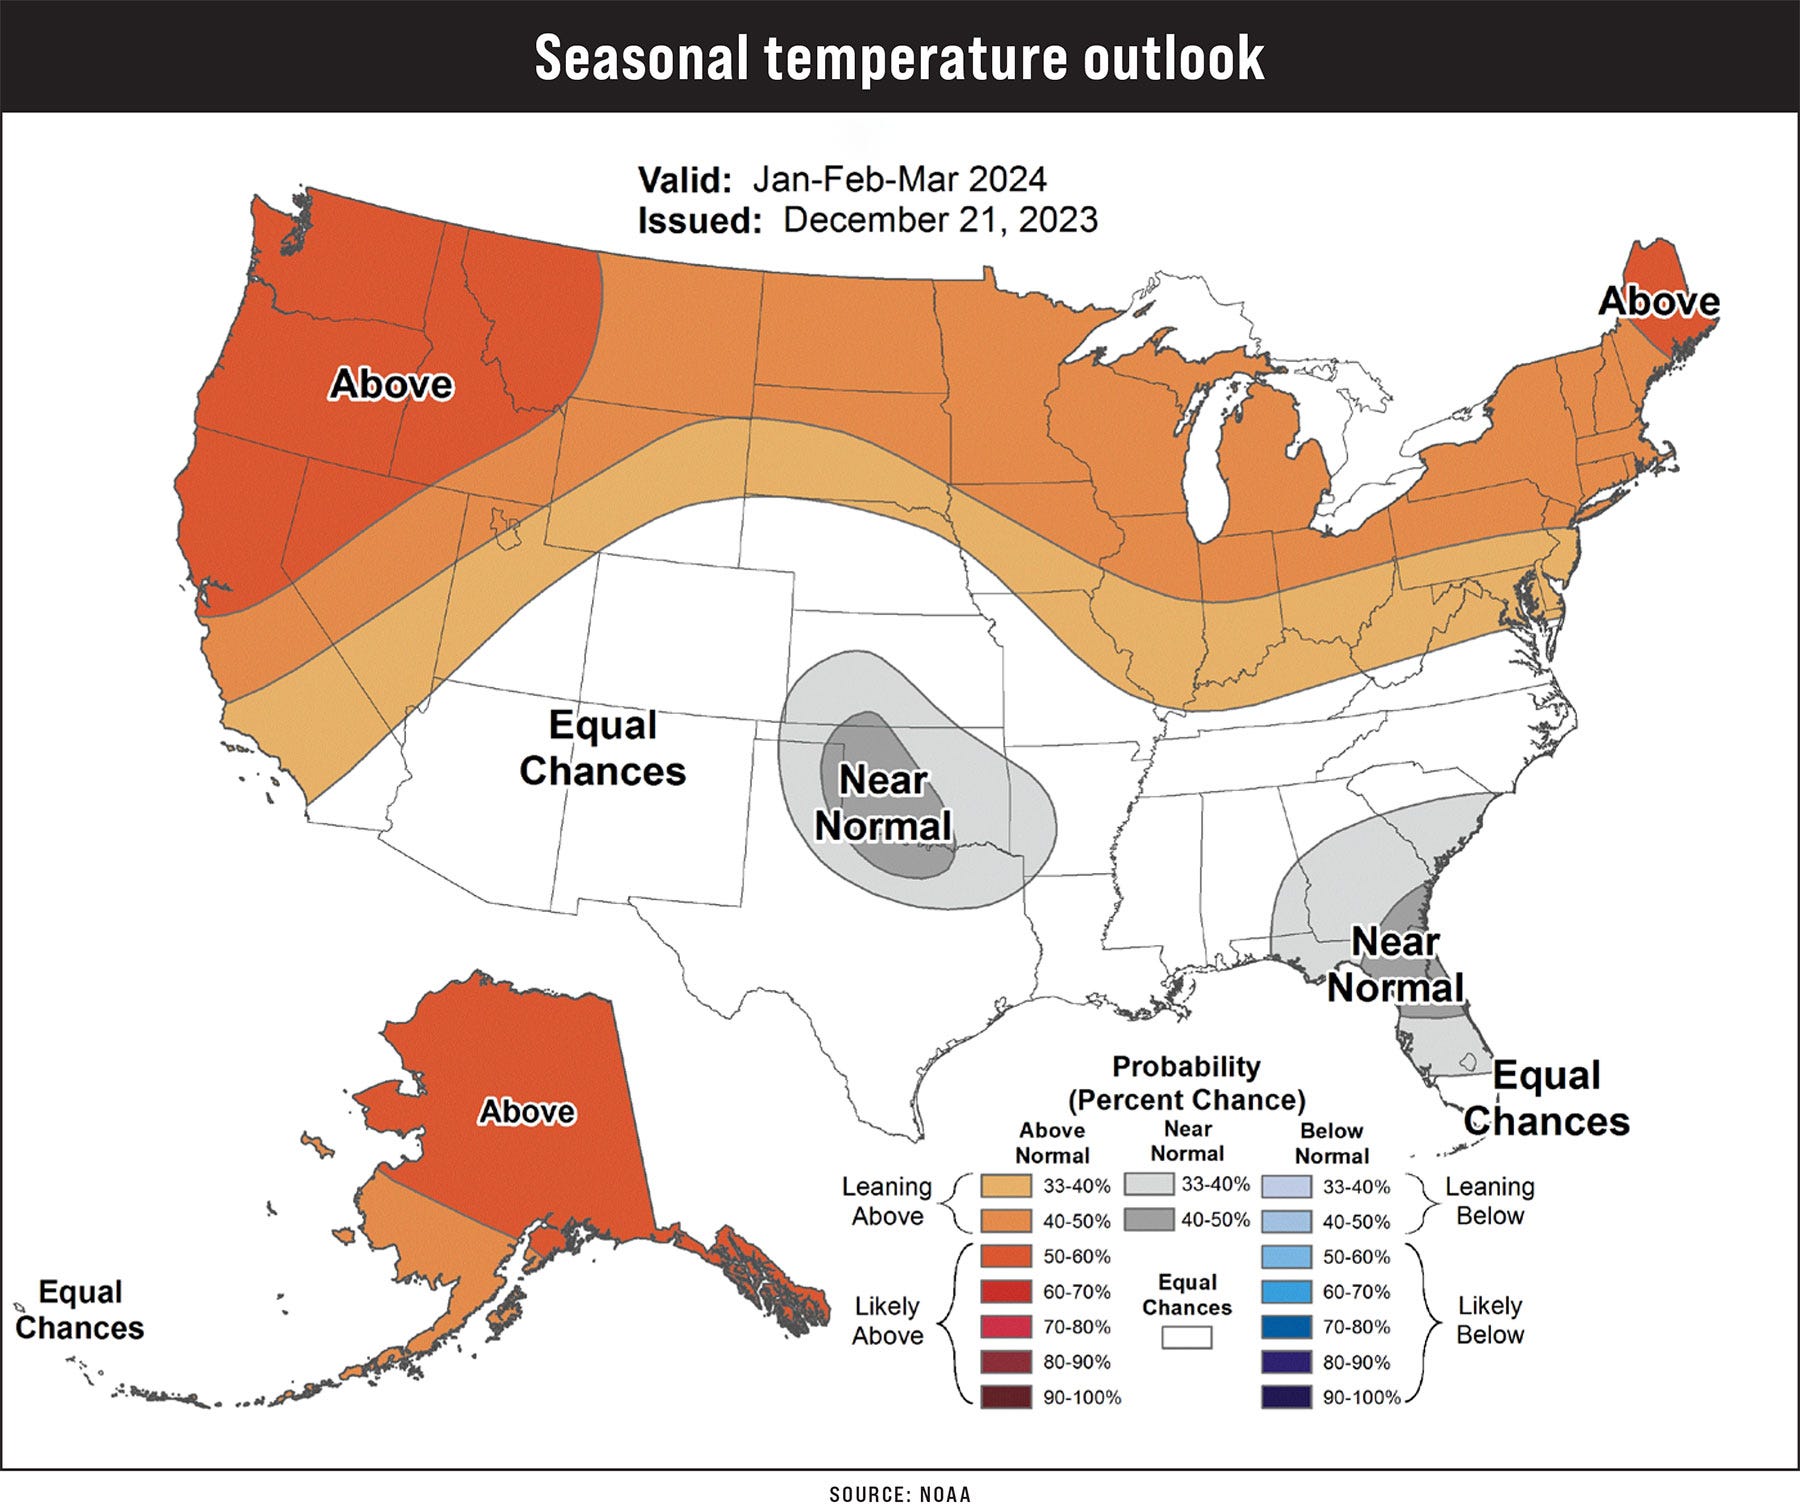 A colored map illustrating seasonal temperature outlook in the United States